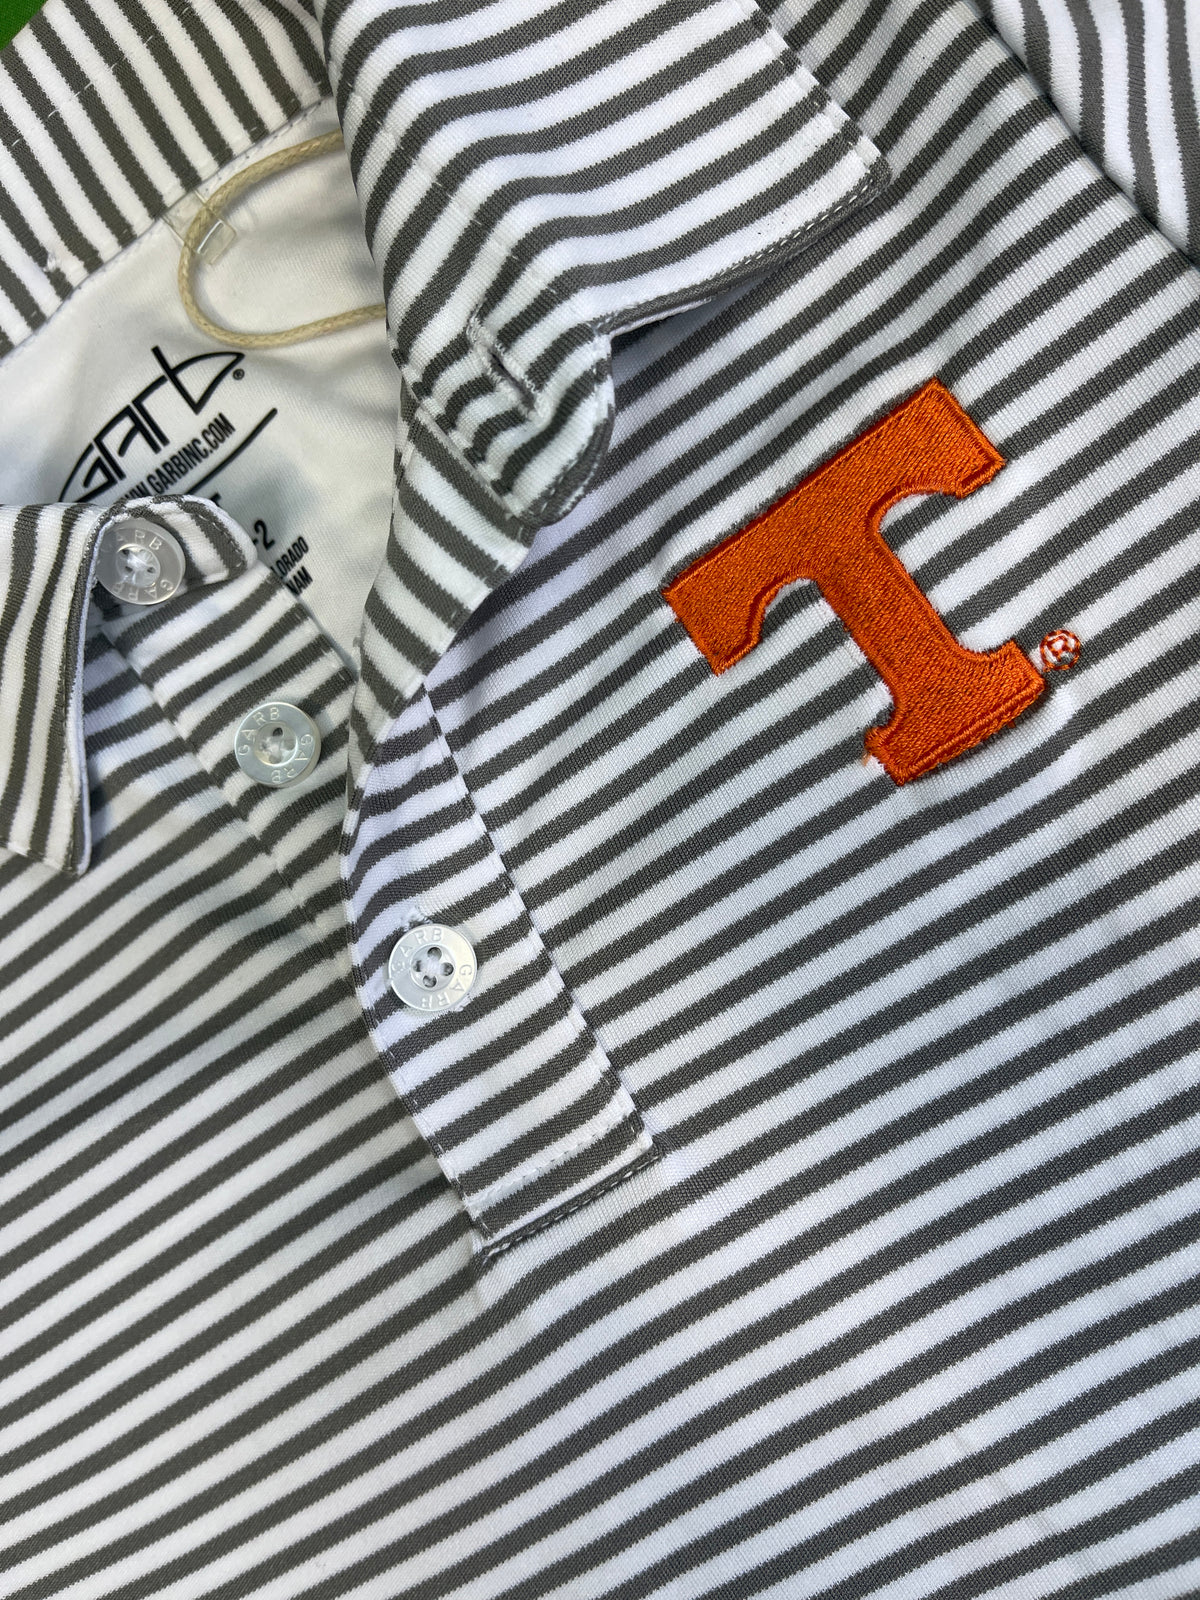 NCAA Tennessee Volunteers Striped Polo Shirt Toddler 2T NWT